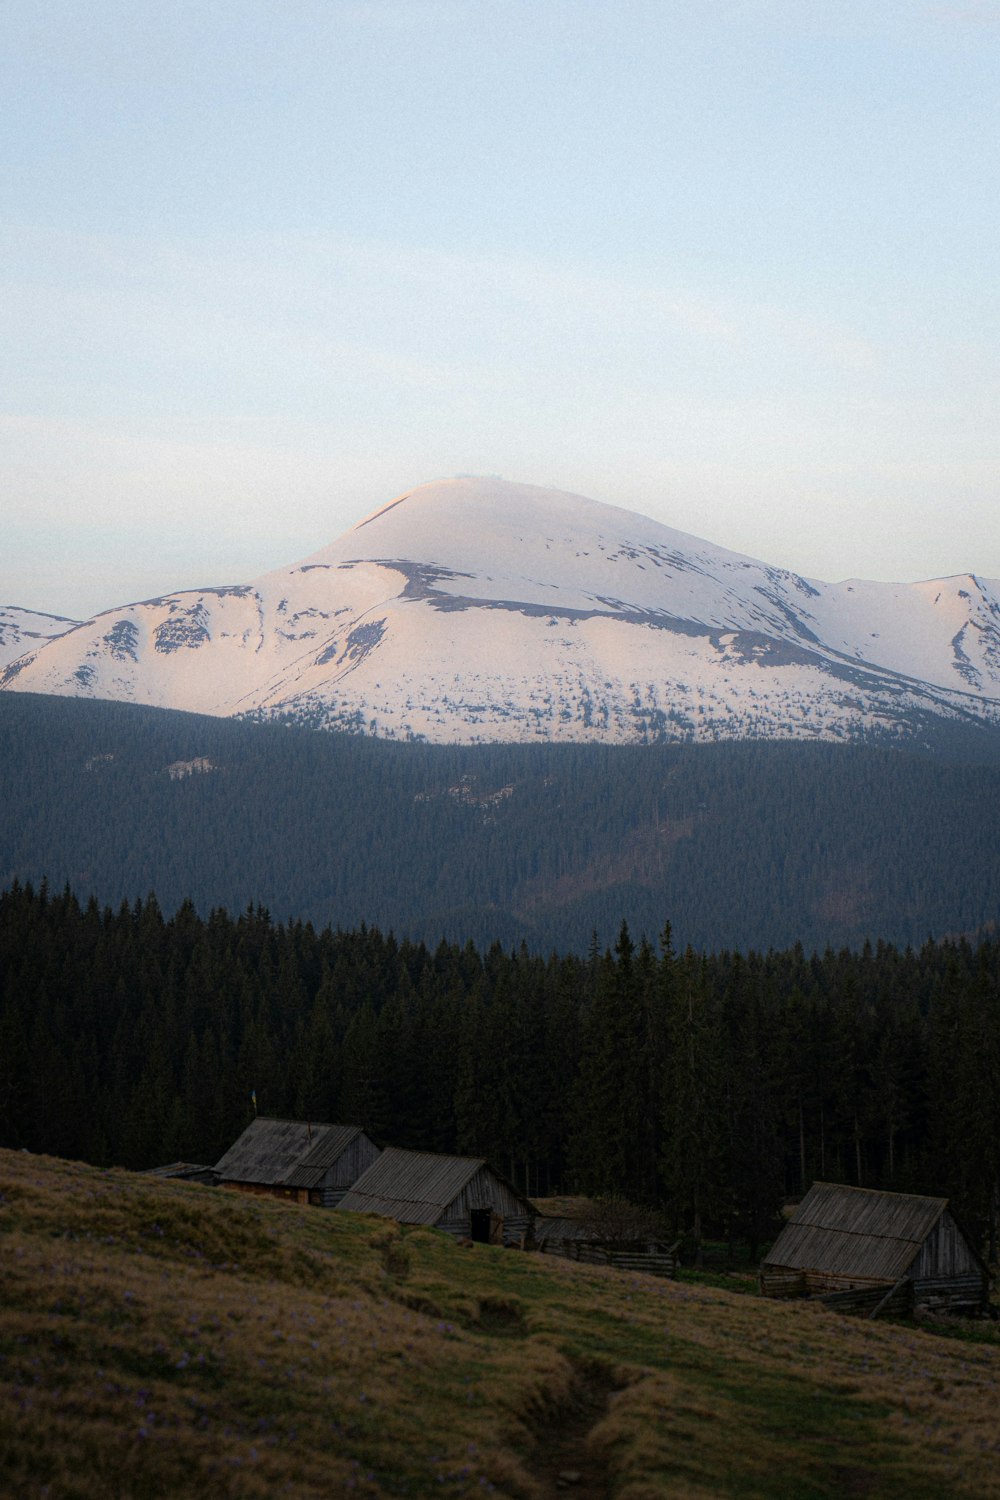 a snow covered mountain in the distance with houses in the foreground